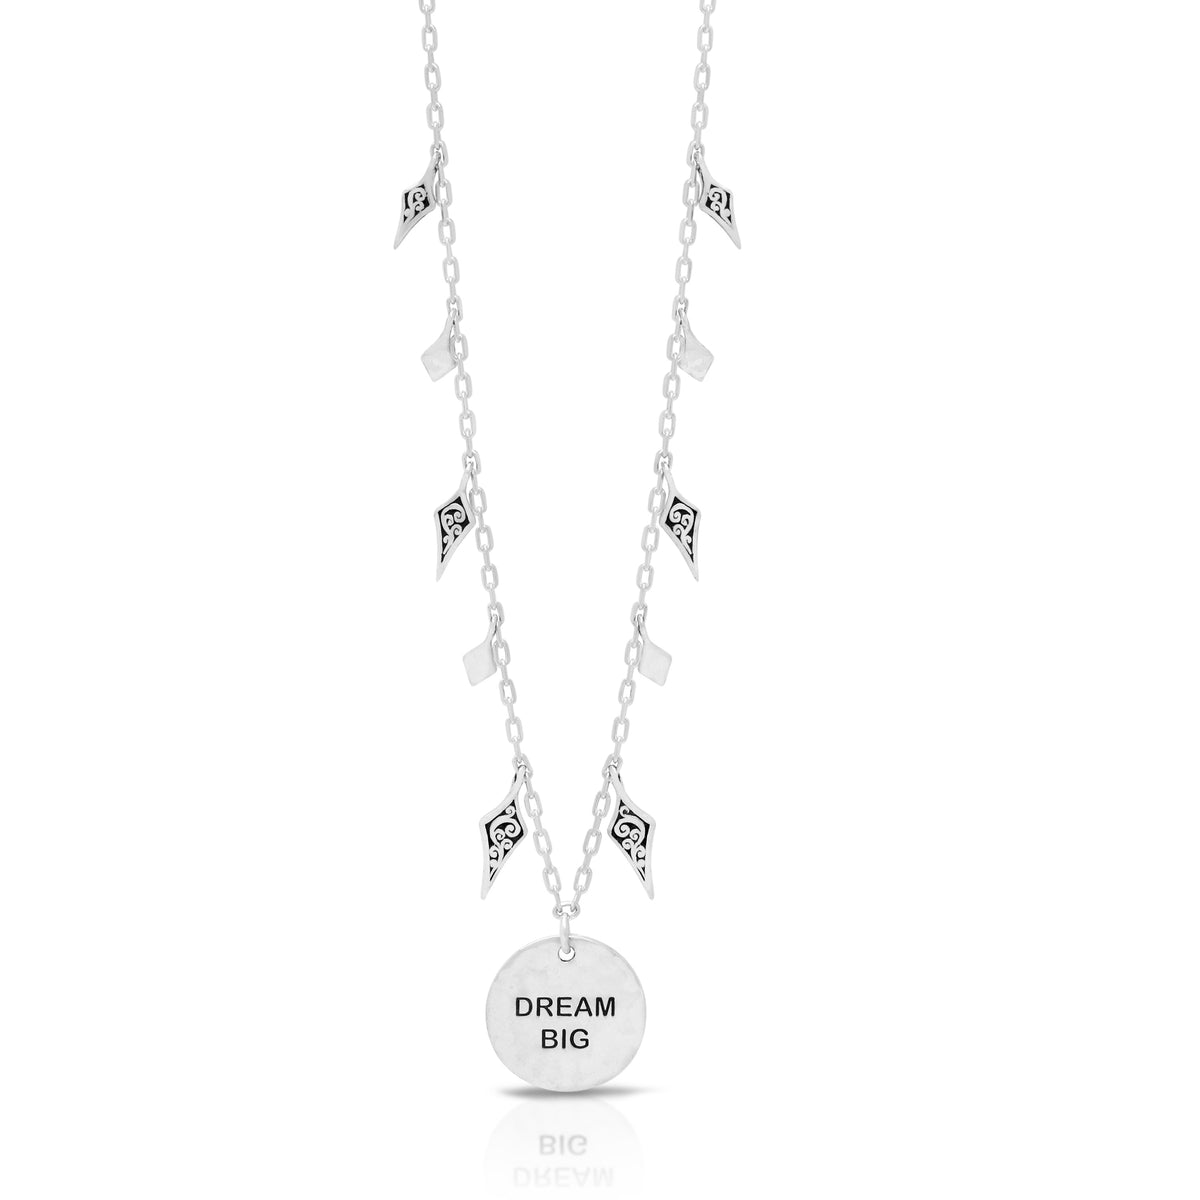 LH Round Pendant ''Dream Big'' 15mm Scroll Back with Dangle Charm on Chain Necklace 16''-18'' Adj